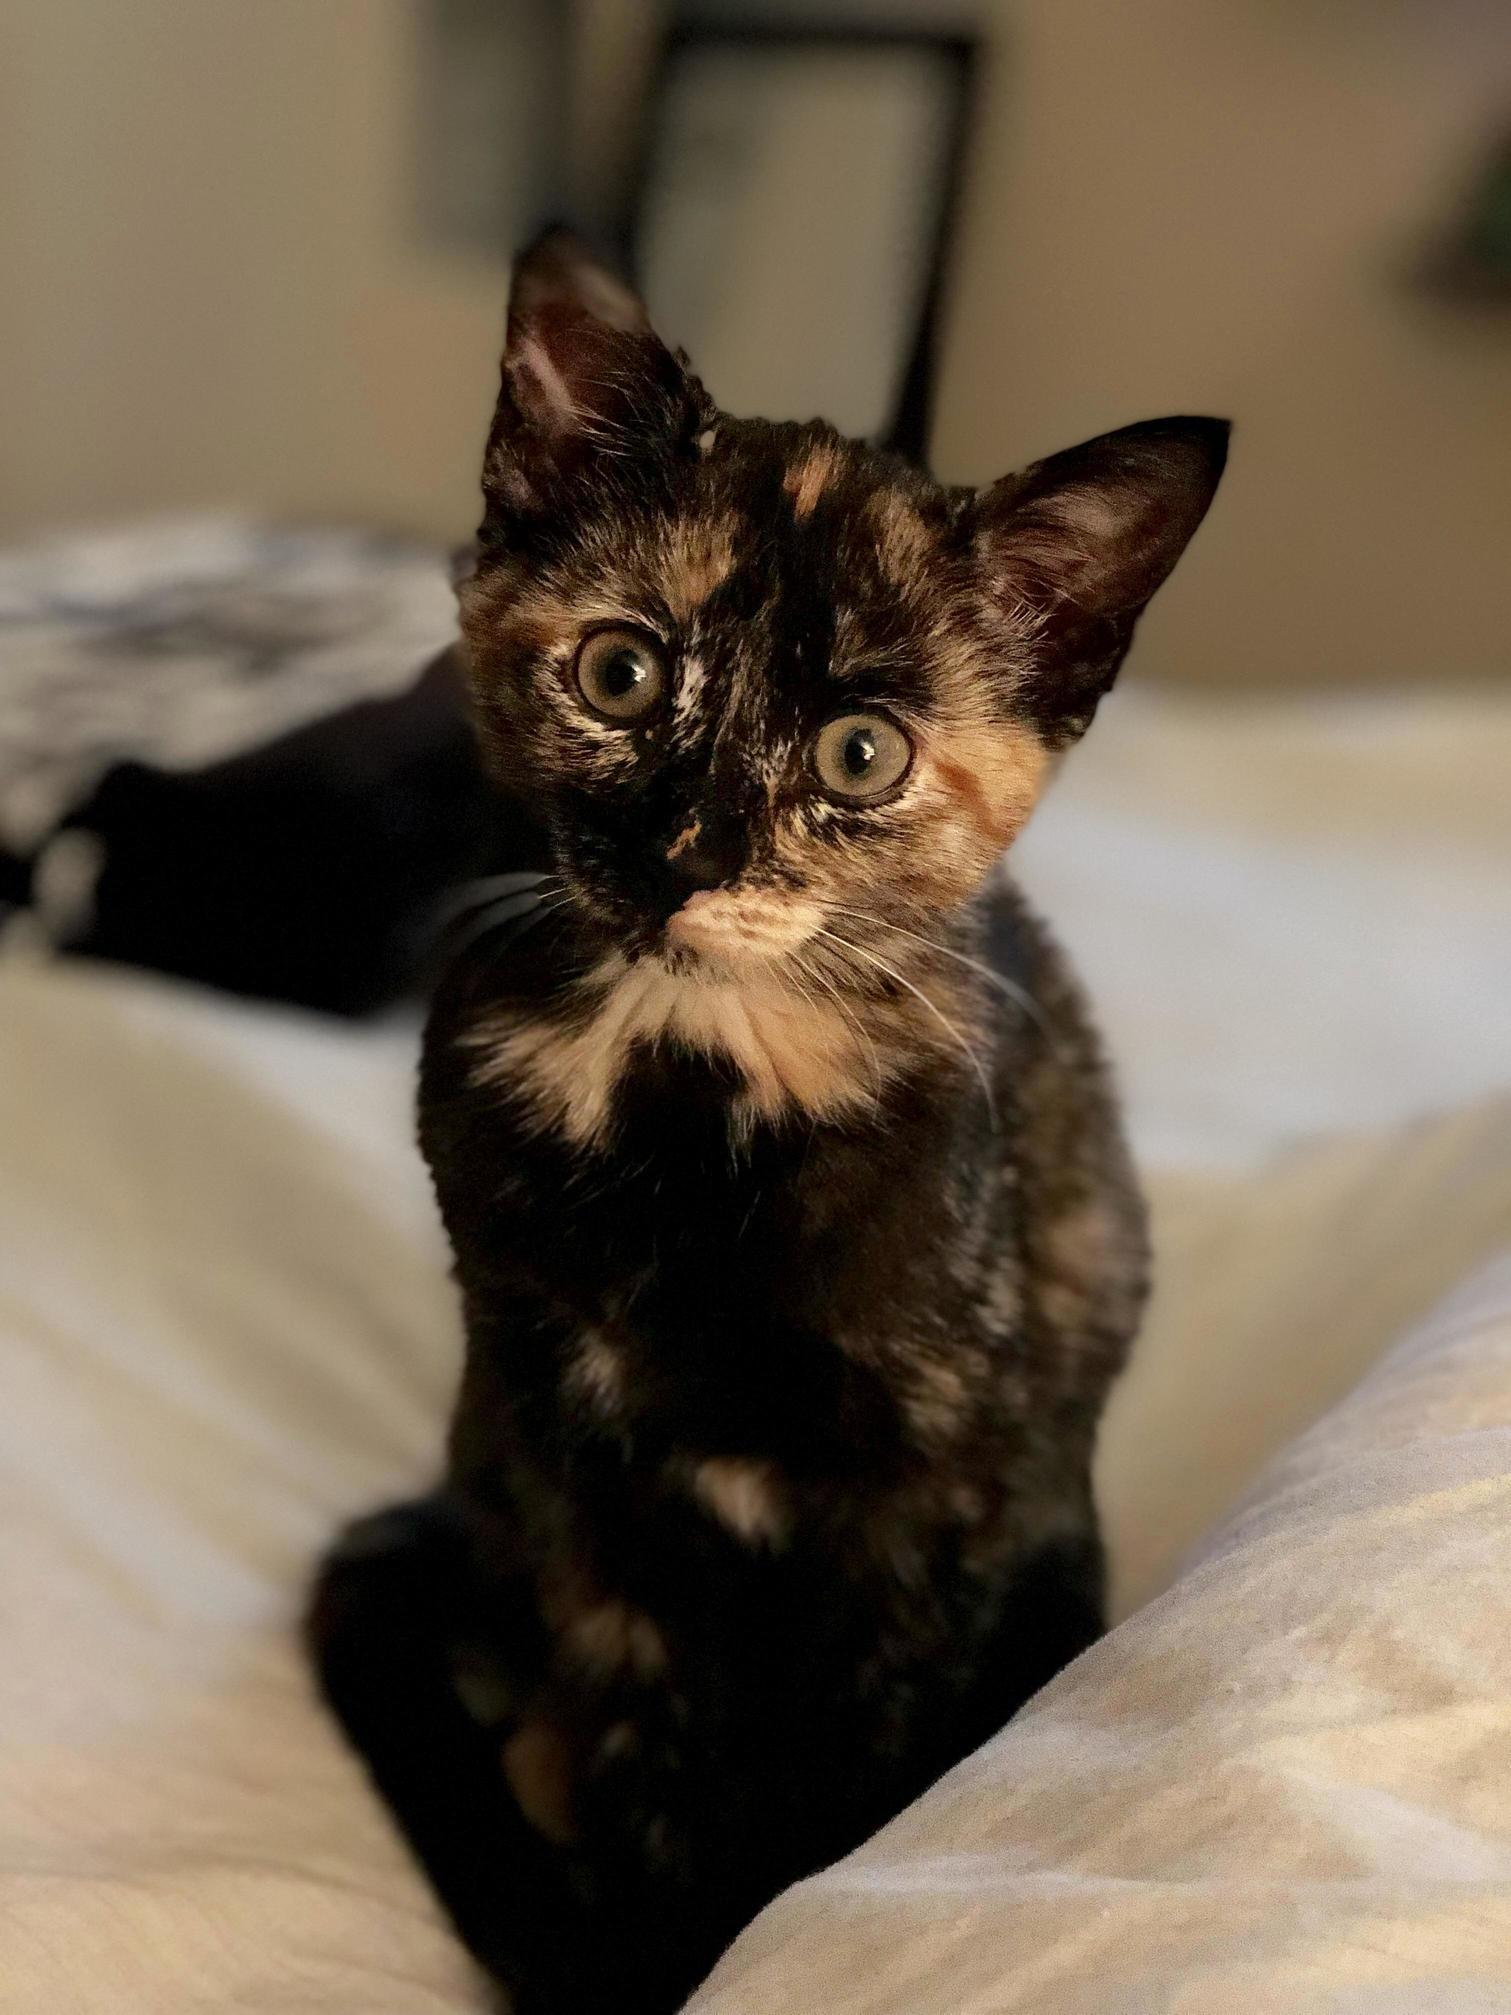 Rescued this little girl from the shelter